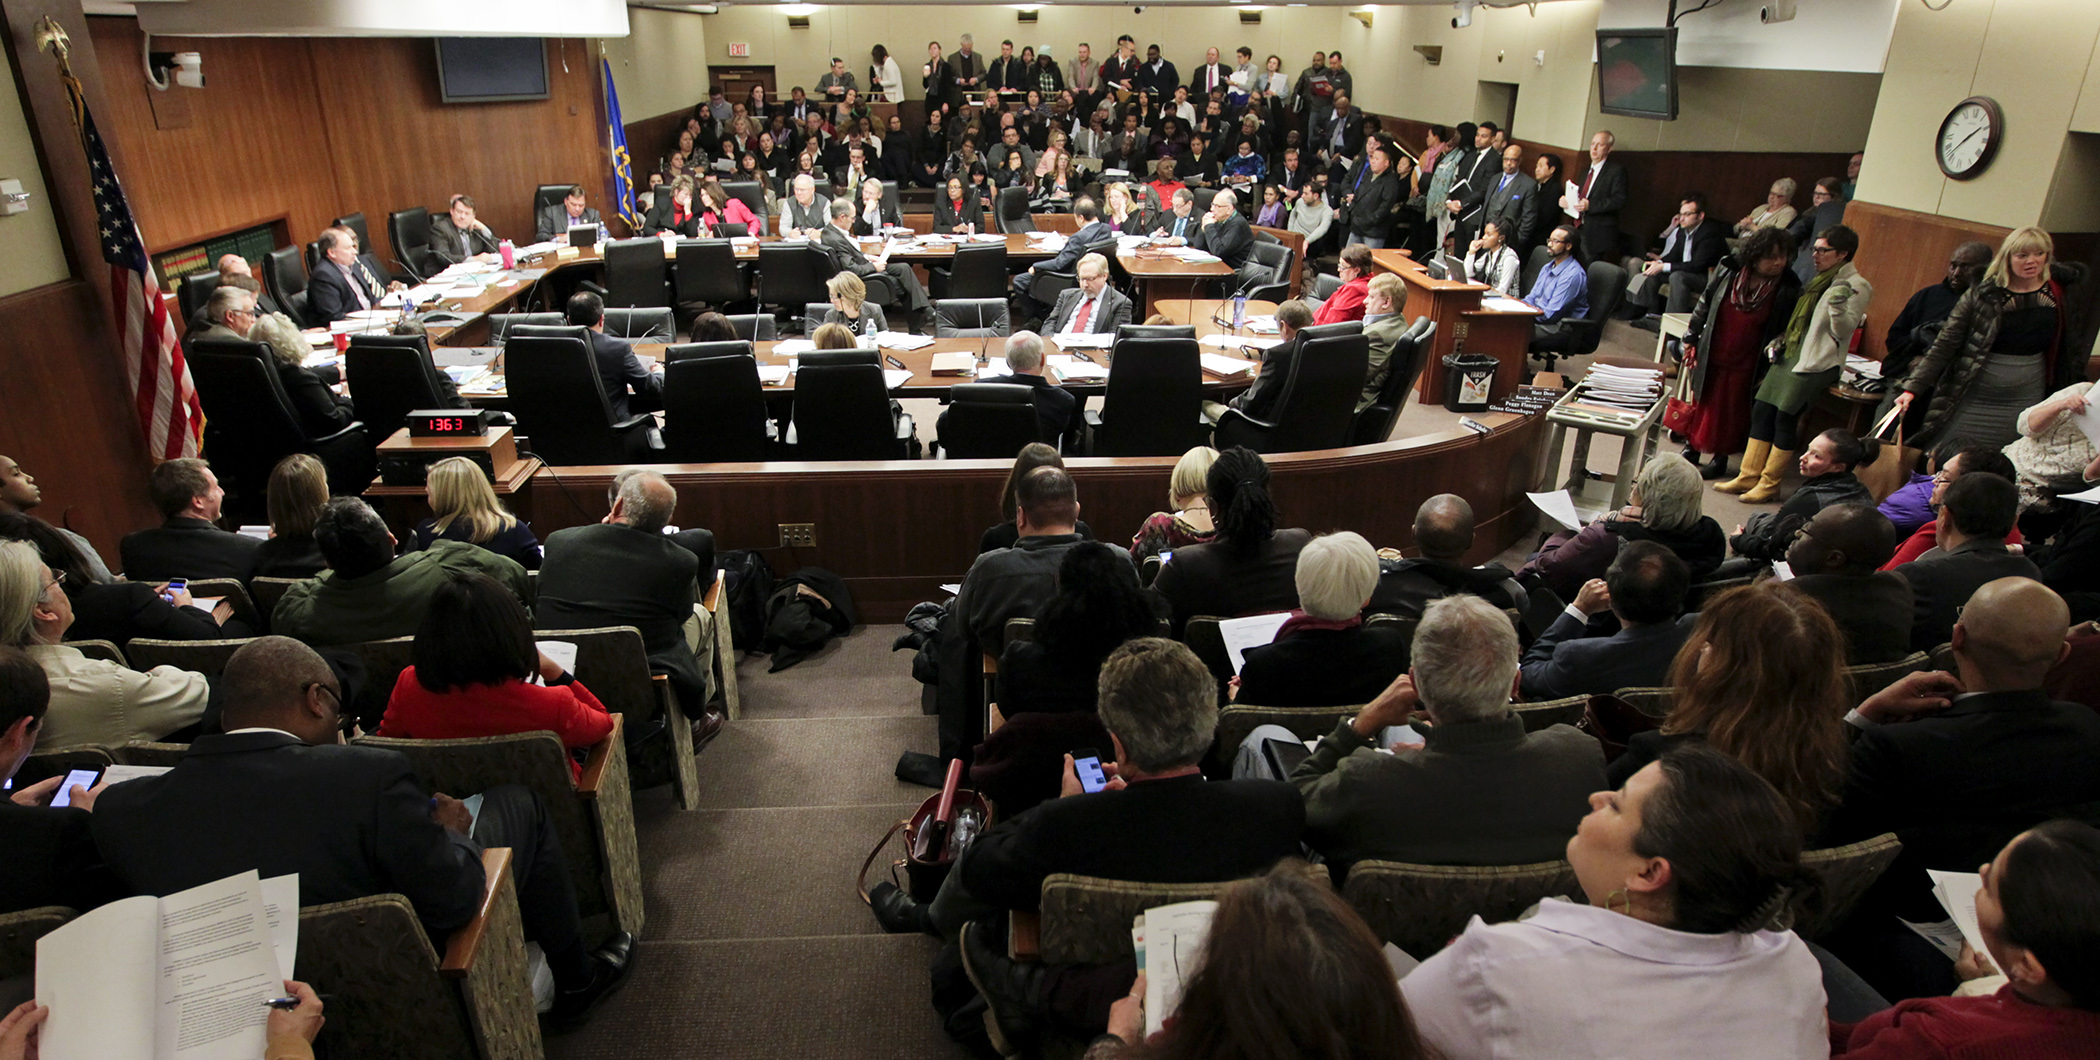 The Jan. 15 meeting of the Legislative Working Group on Economic Disparities drew a standing room-only crowd as legislators were scheduled to hear testimony from more than 70 witnesses. Photo by Paul Battaglia